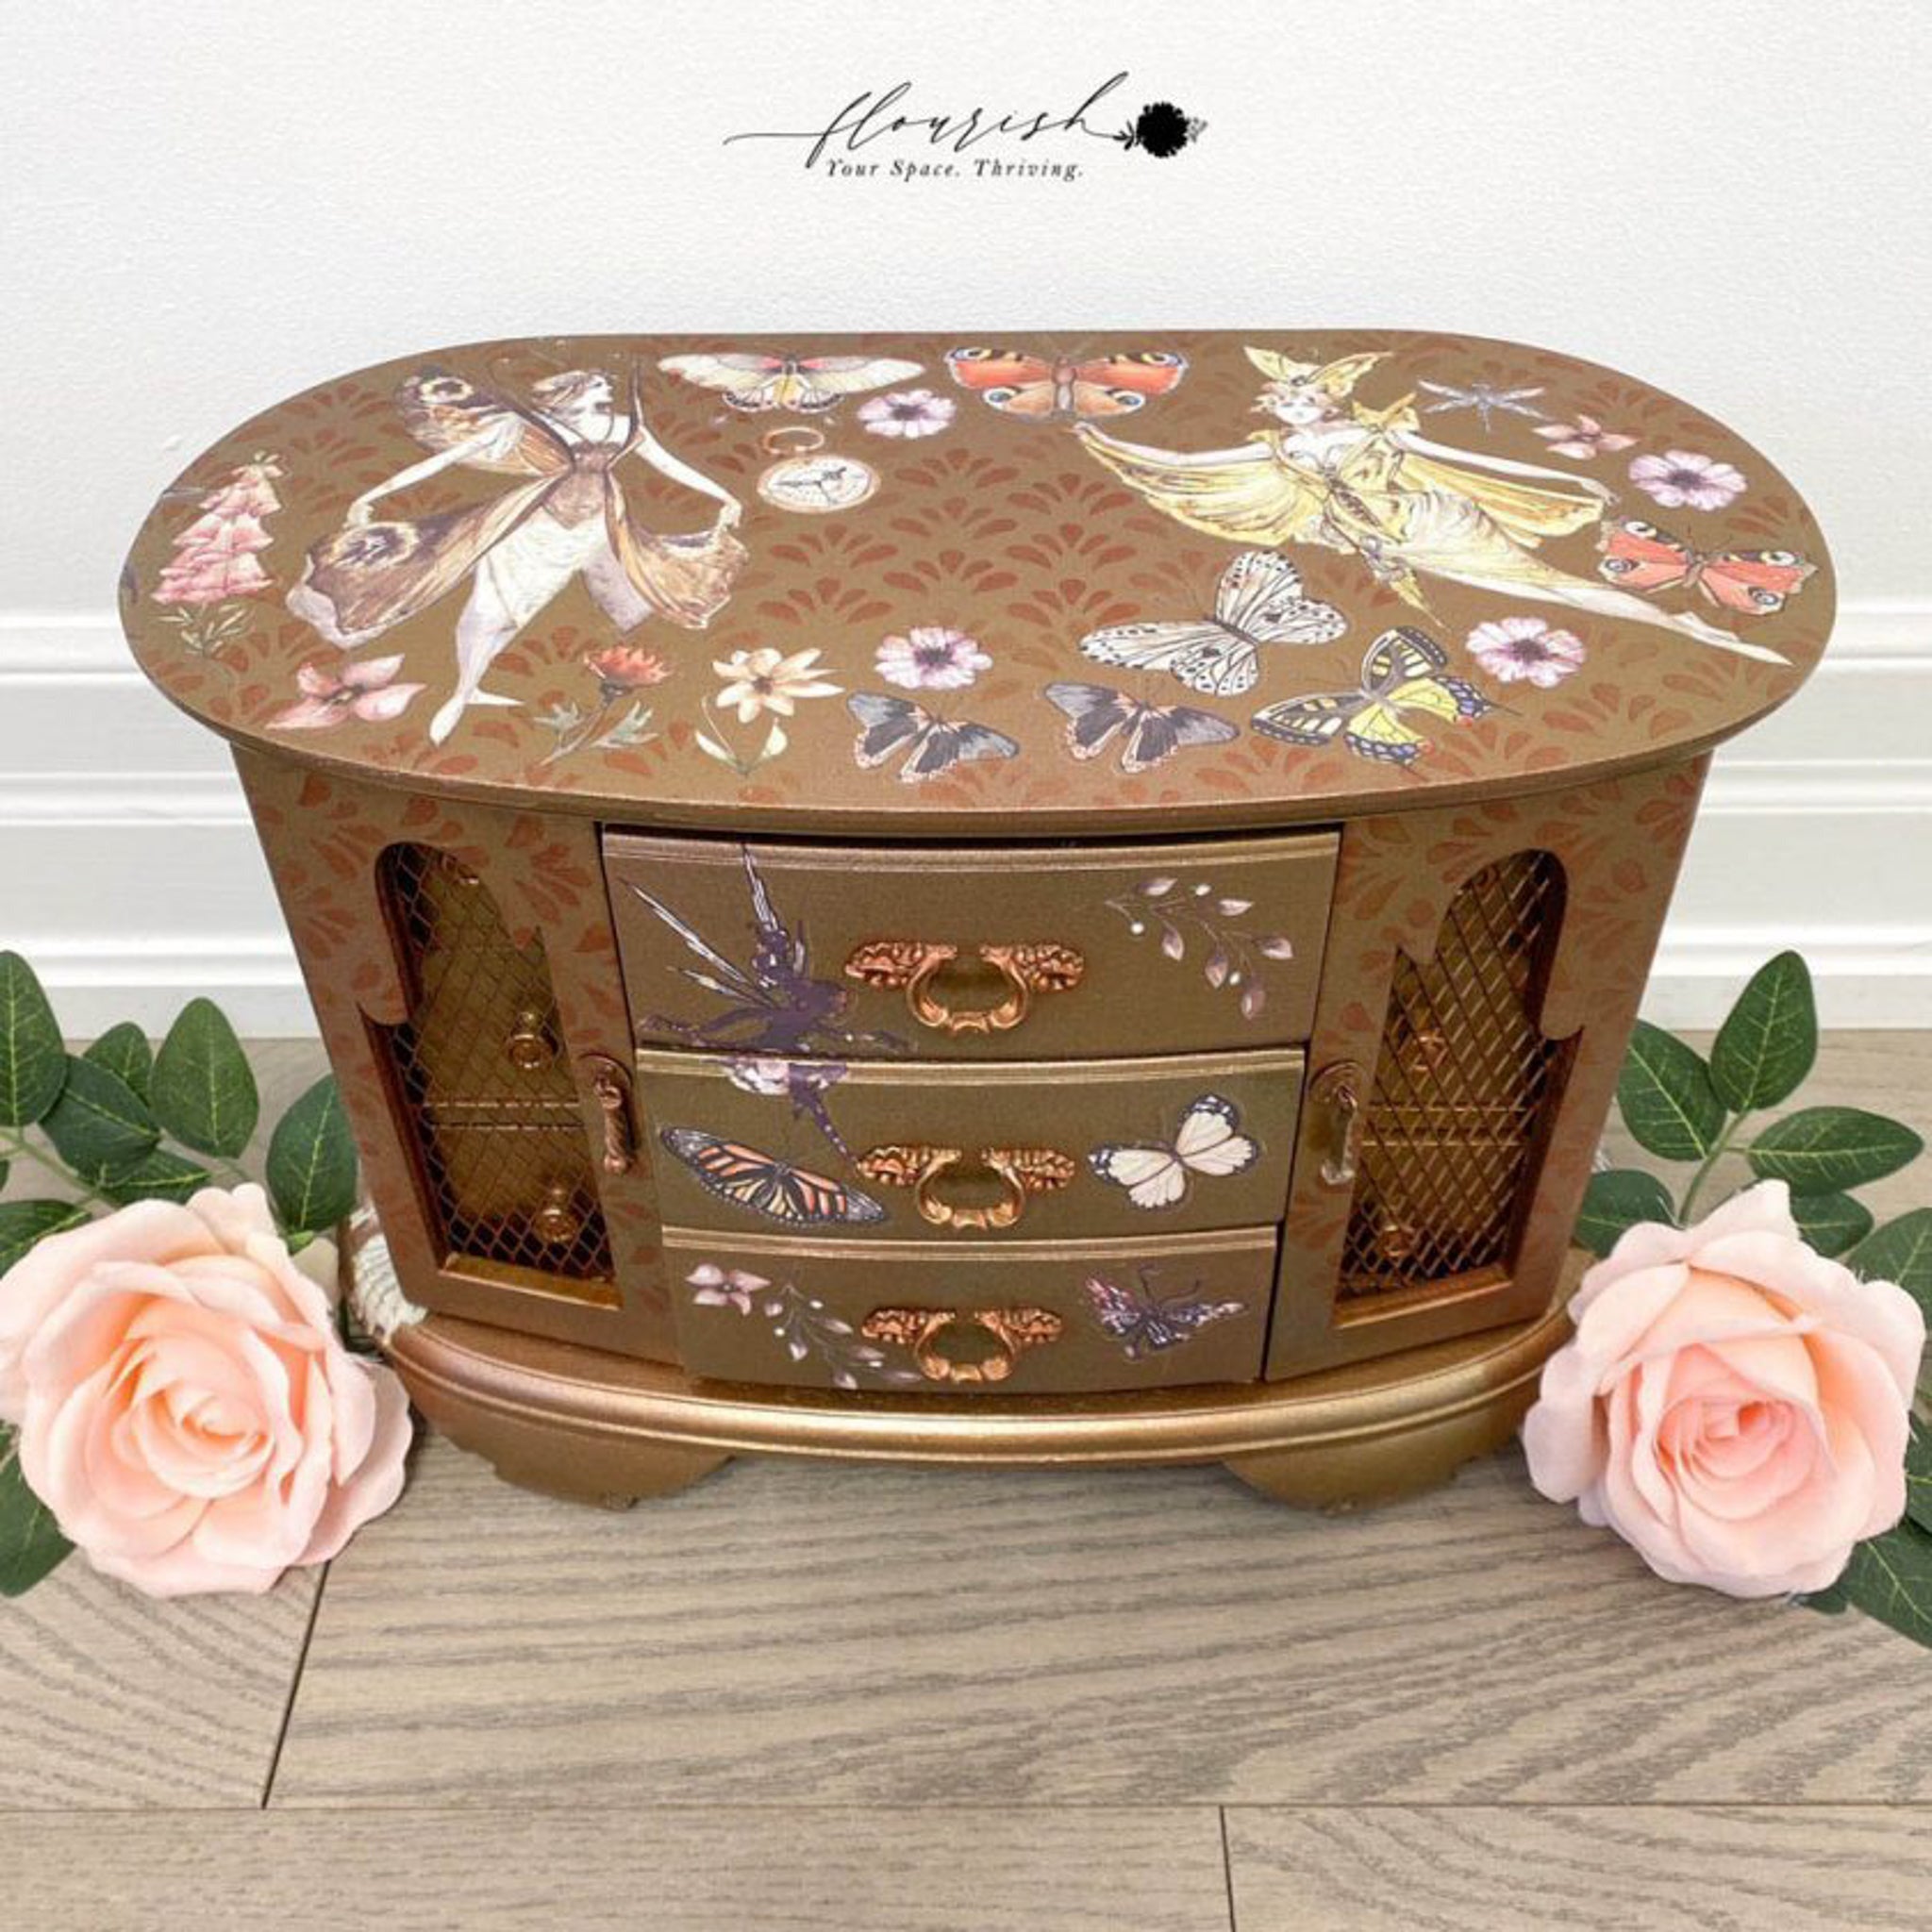 A vintage table top jewelry box refurbished by Flourish You Space Thriving is painted metallic brown and features the Forest Fairies small transfer on it.